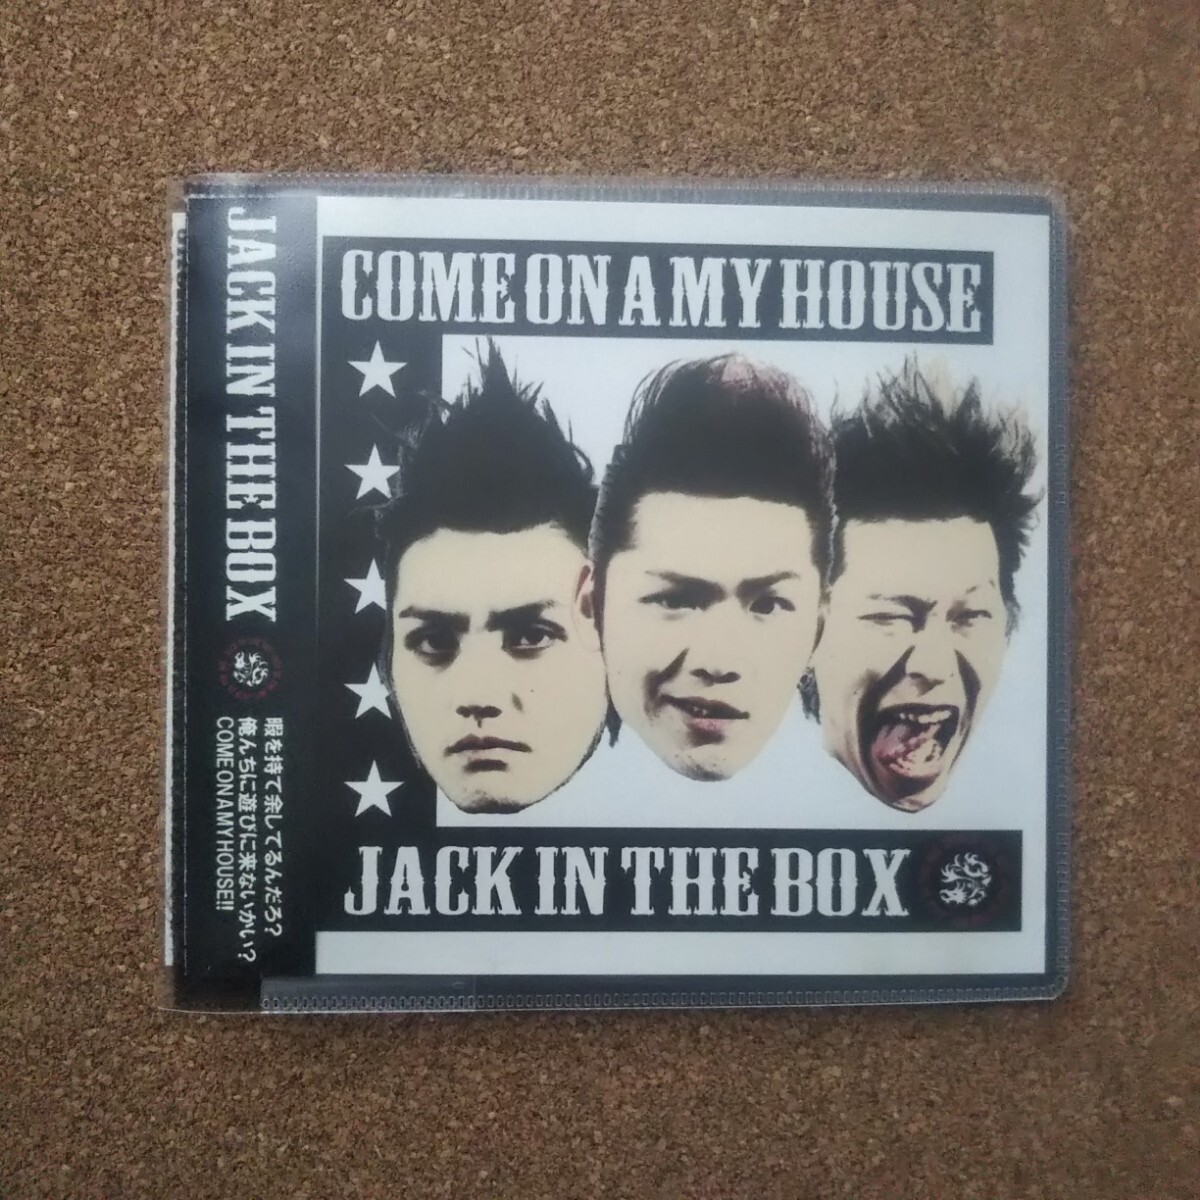 ◆CD◆JACK IN THE BOX◆COME ON A MY HOUSE◆ロックンロール◆_画像1